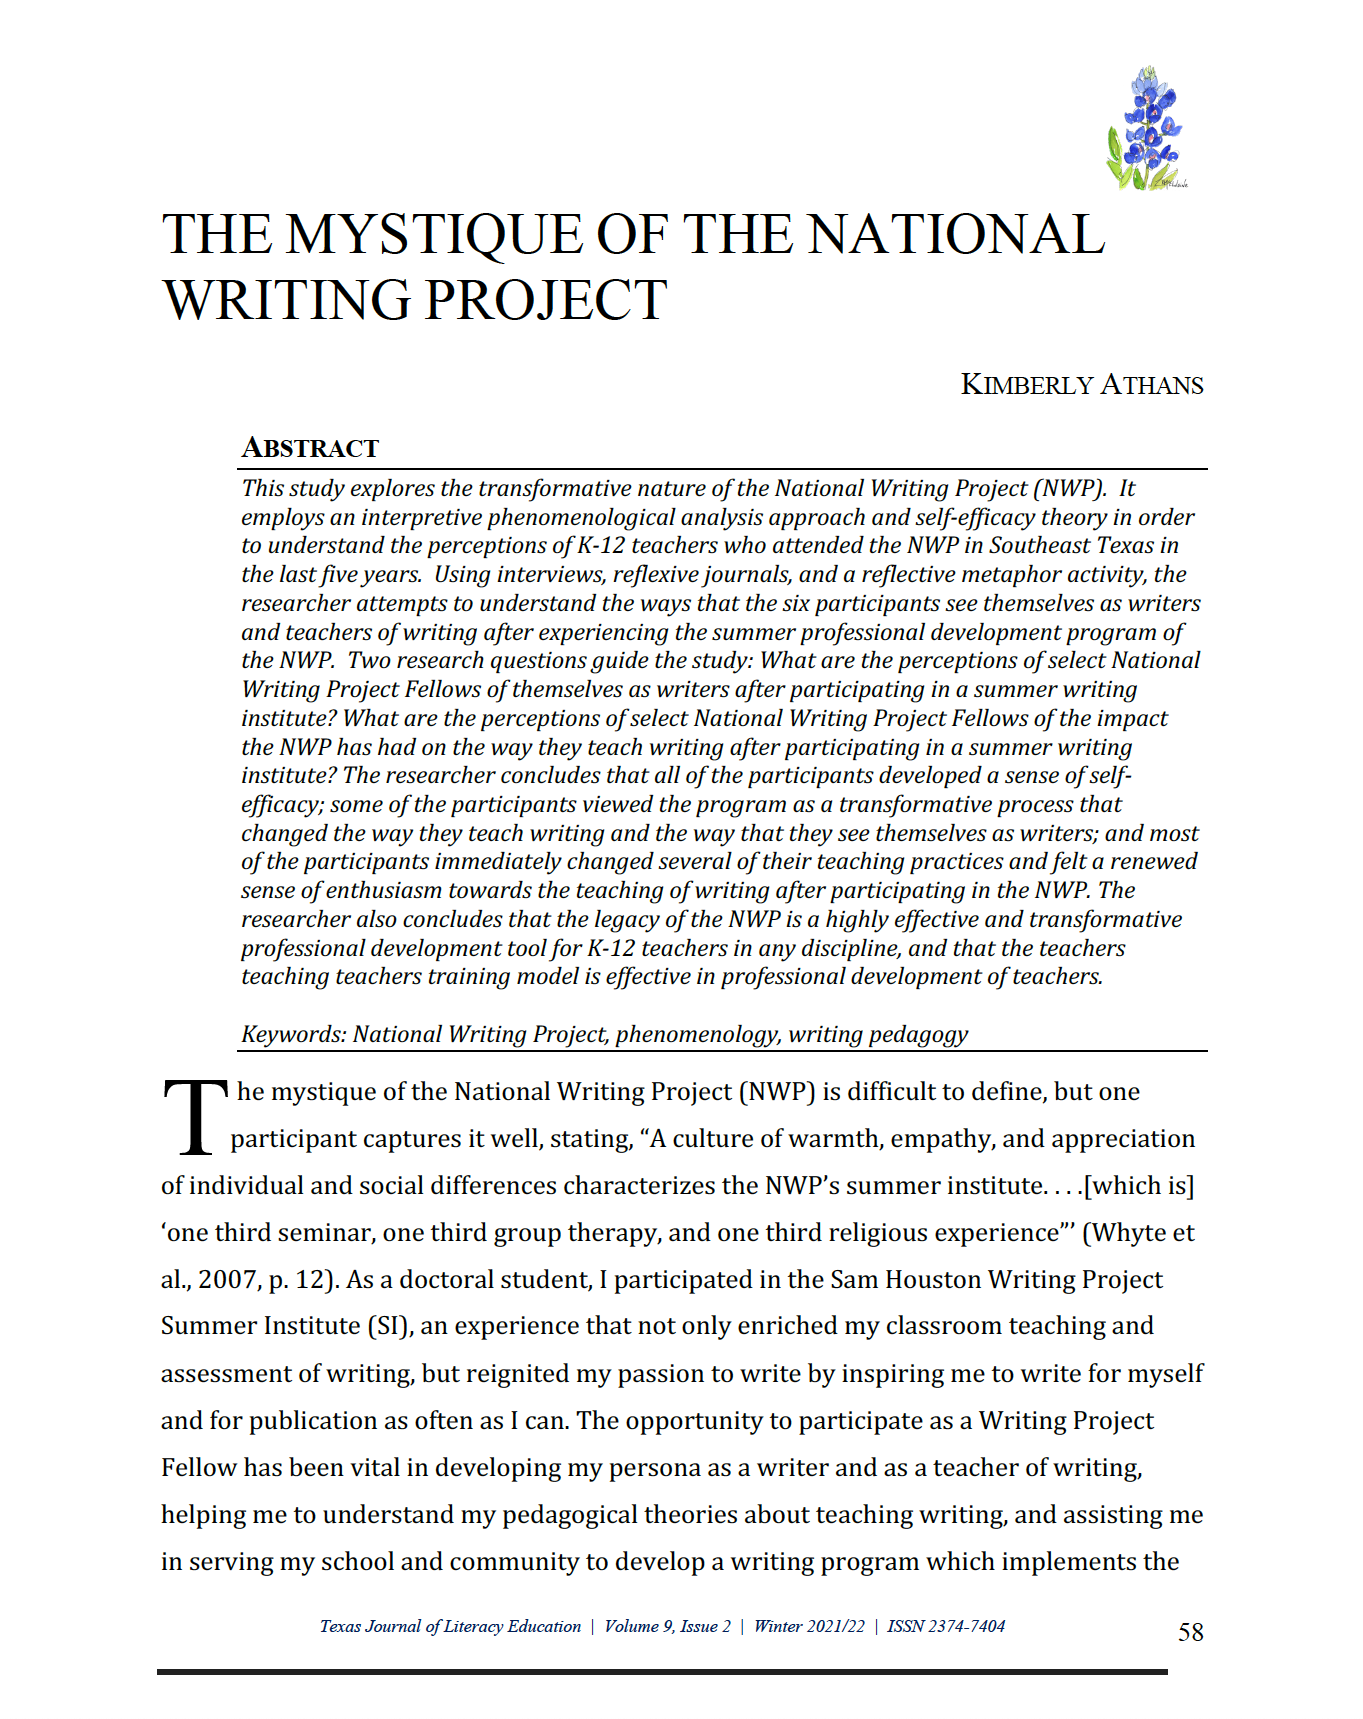 screenshot of first page of Athans article "The Mystique of the National Writing Project"